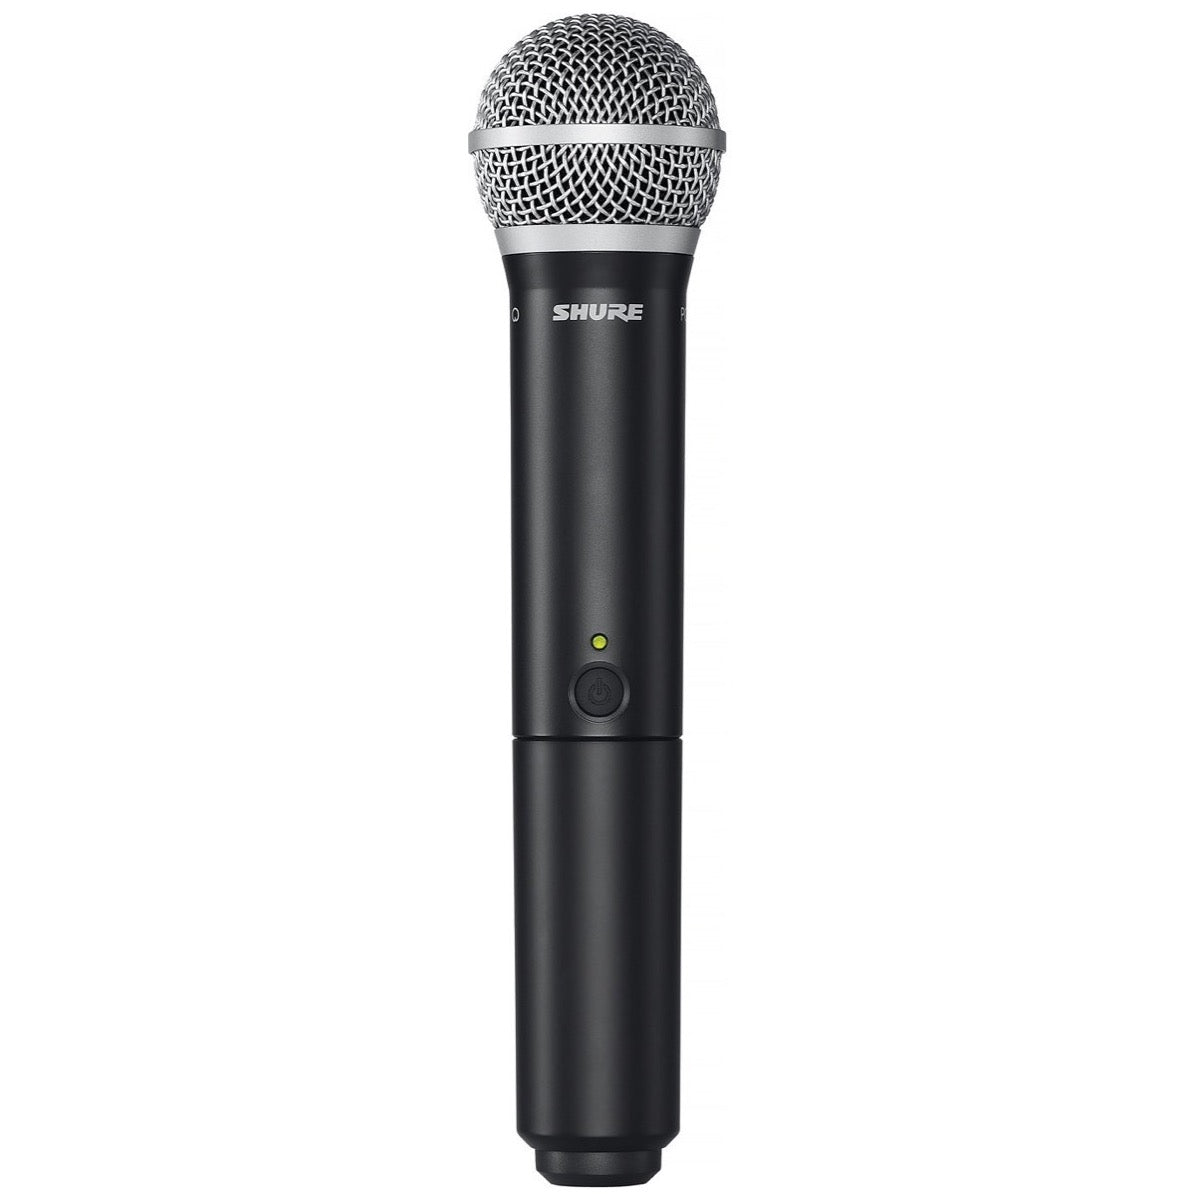 Shure BLX1288/P31 Combination Wireless PGA31 Headset and PG58 Handheld Microphone System, Band H9 (512-542 MHz)